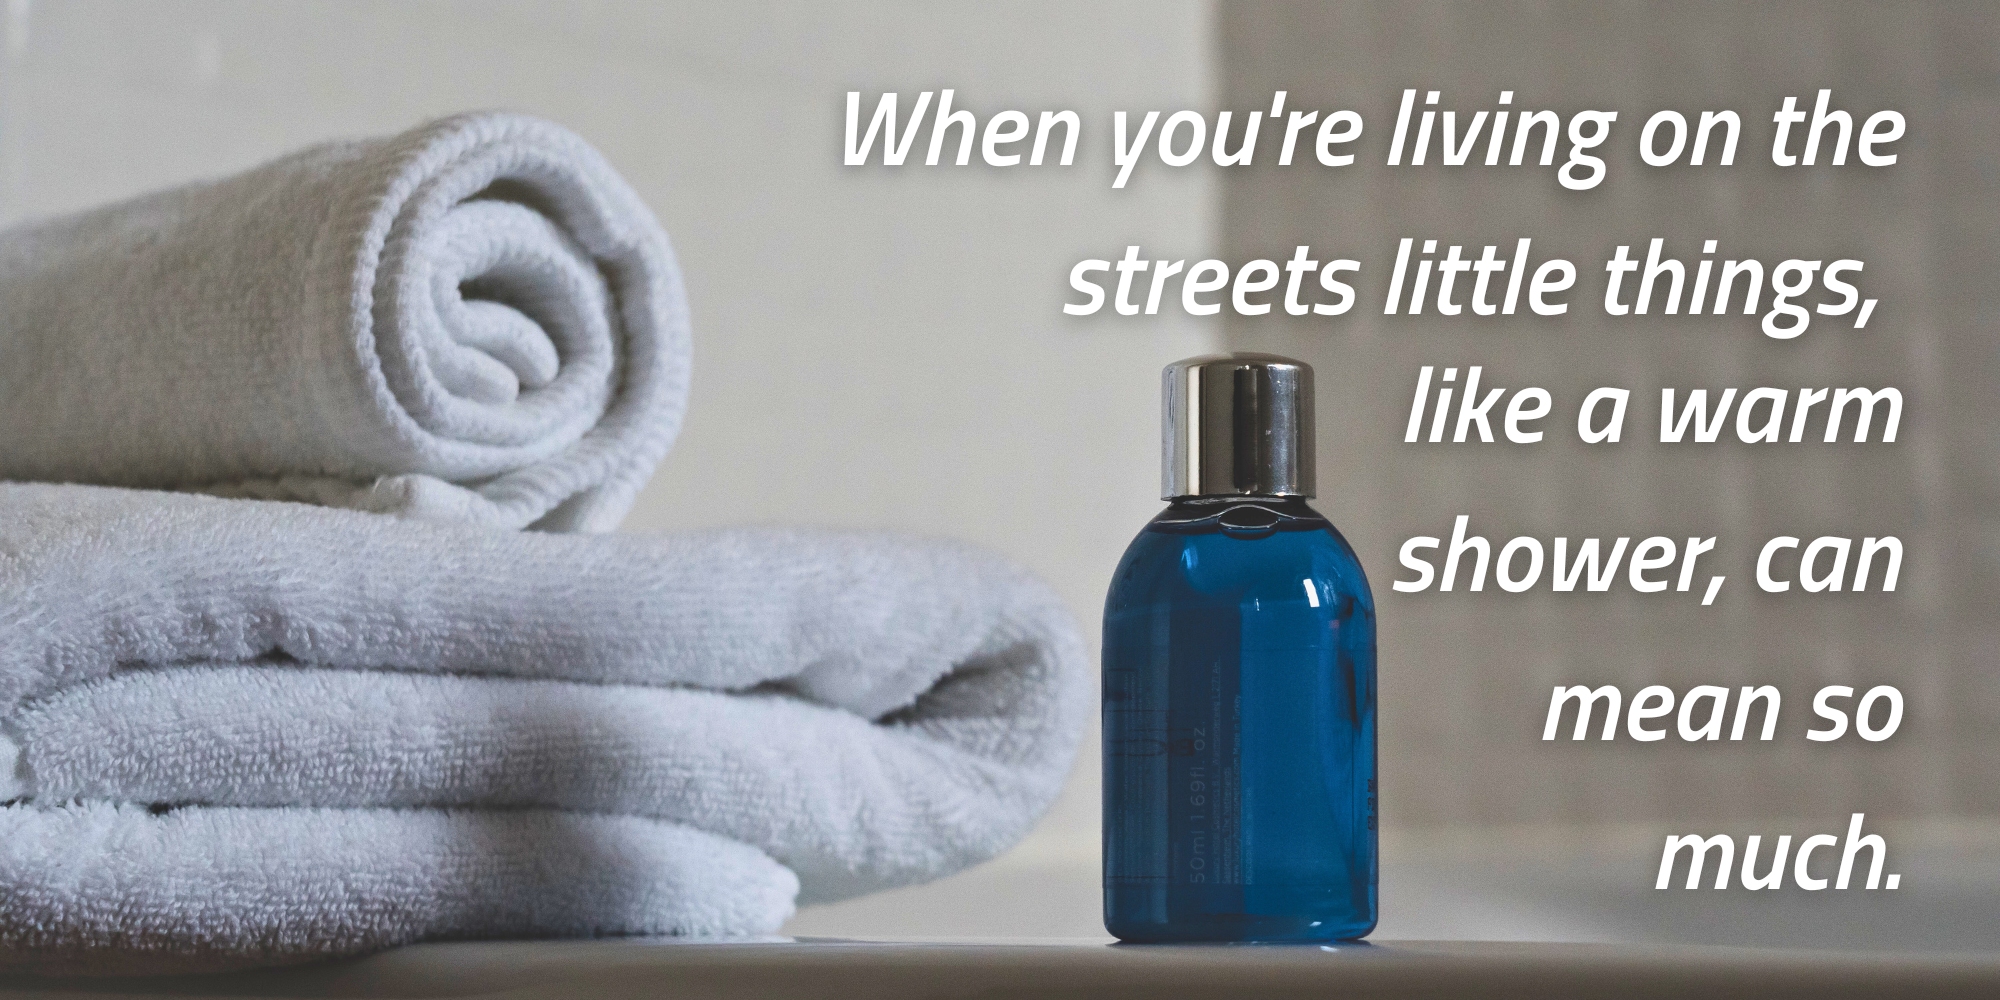 A photo of soap and text reads 'when you live on the streets, small things like warm showers can mean a lot'